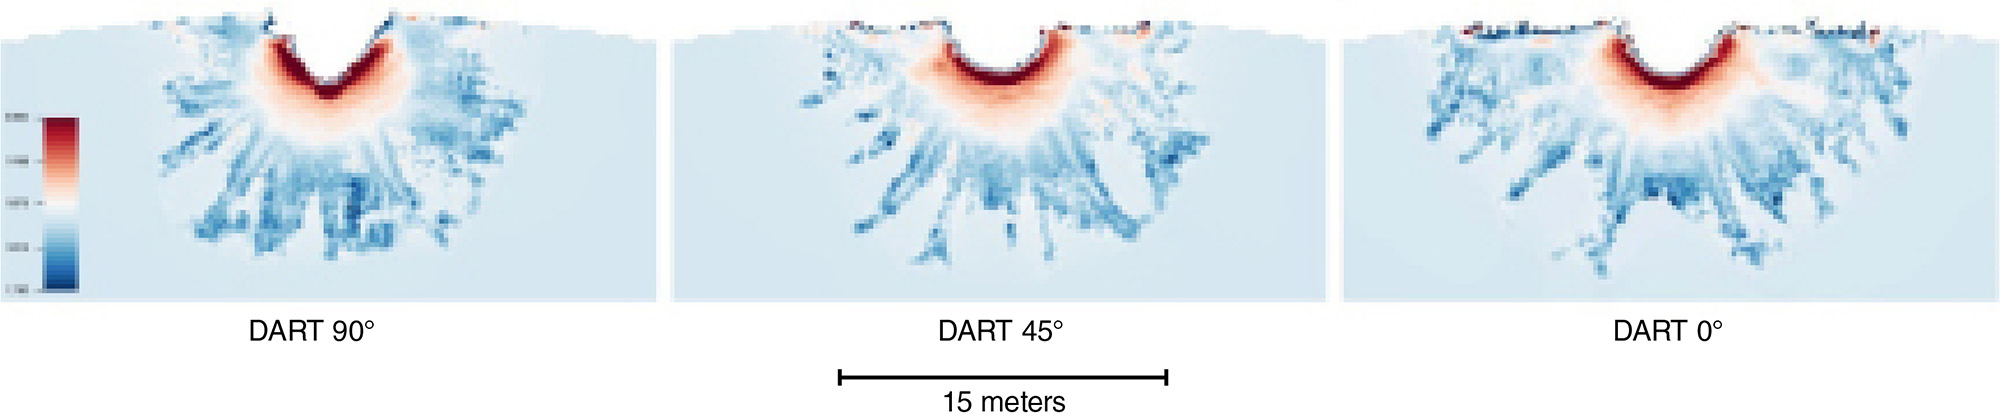 A layer a few meters deep is compacted at 2.0 to 1.9 g/cm<sup>3</sup> along the bowl of the crater itself. Areas of reduced density radiate from the crater like dendrites about 5 meters further horizontally and deeper. 